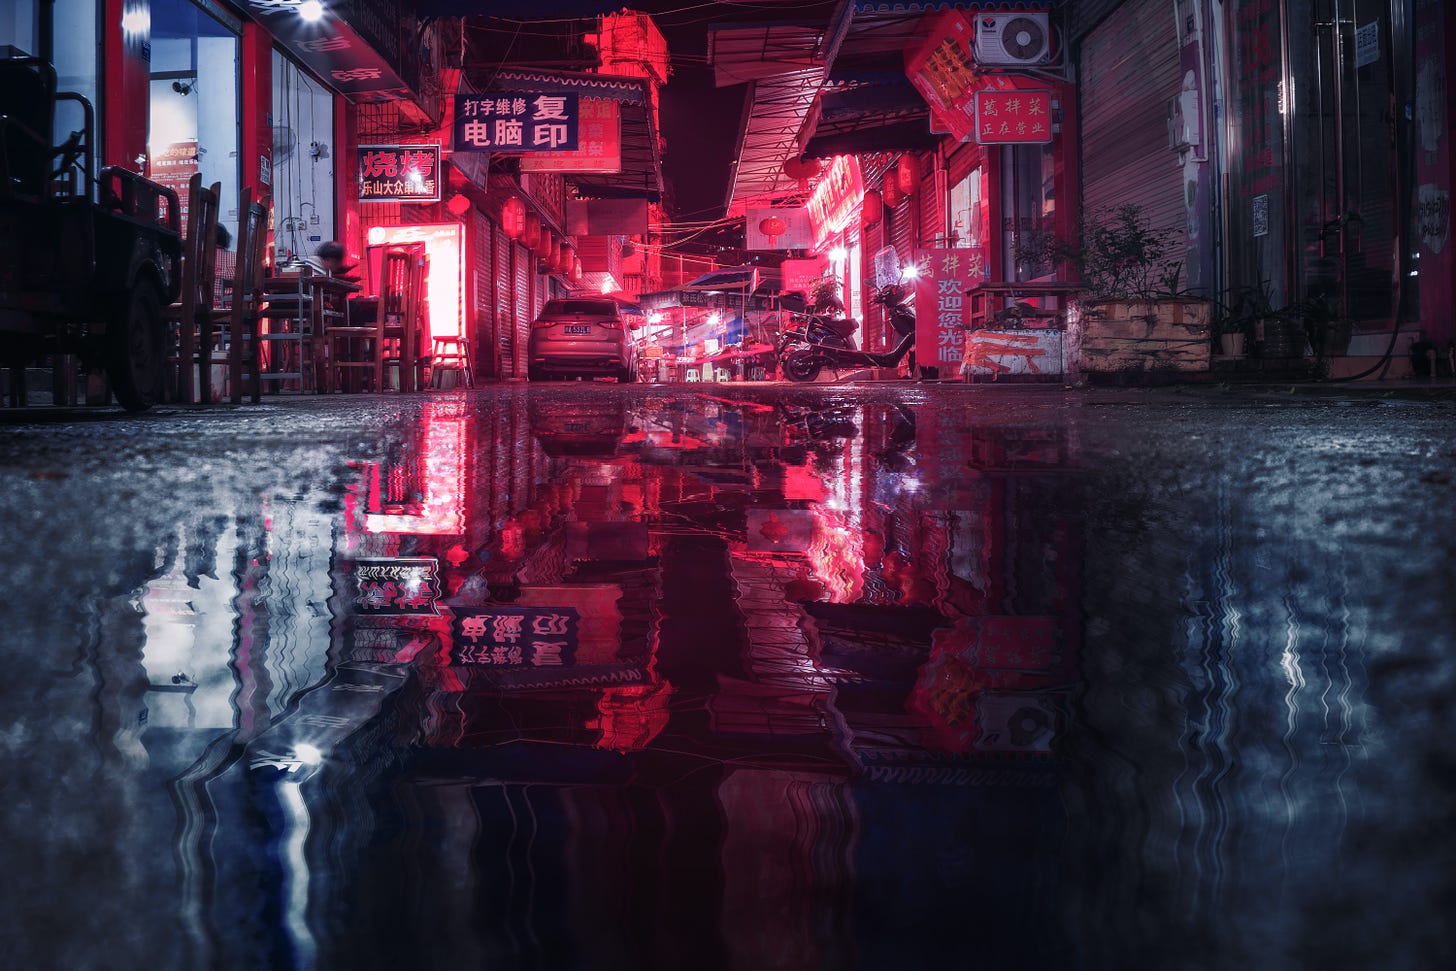 An alley downtown at night illuminated by red neon.